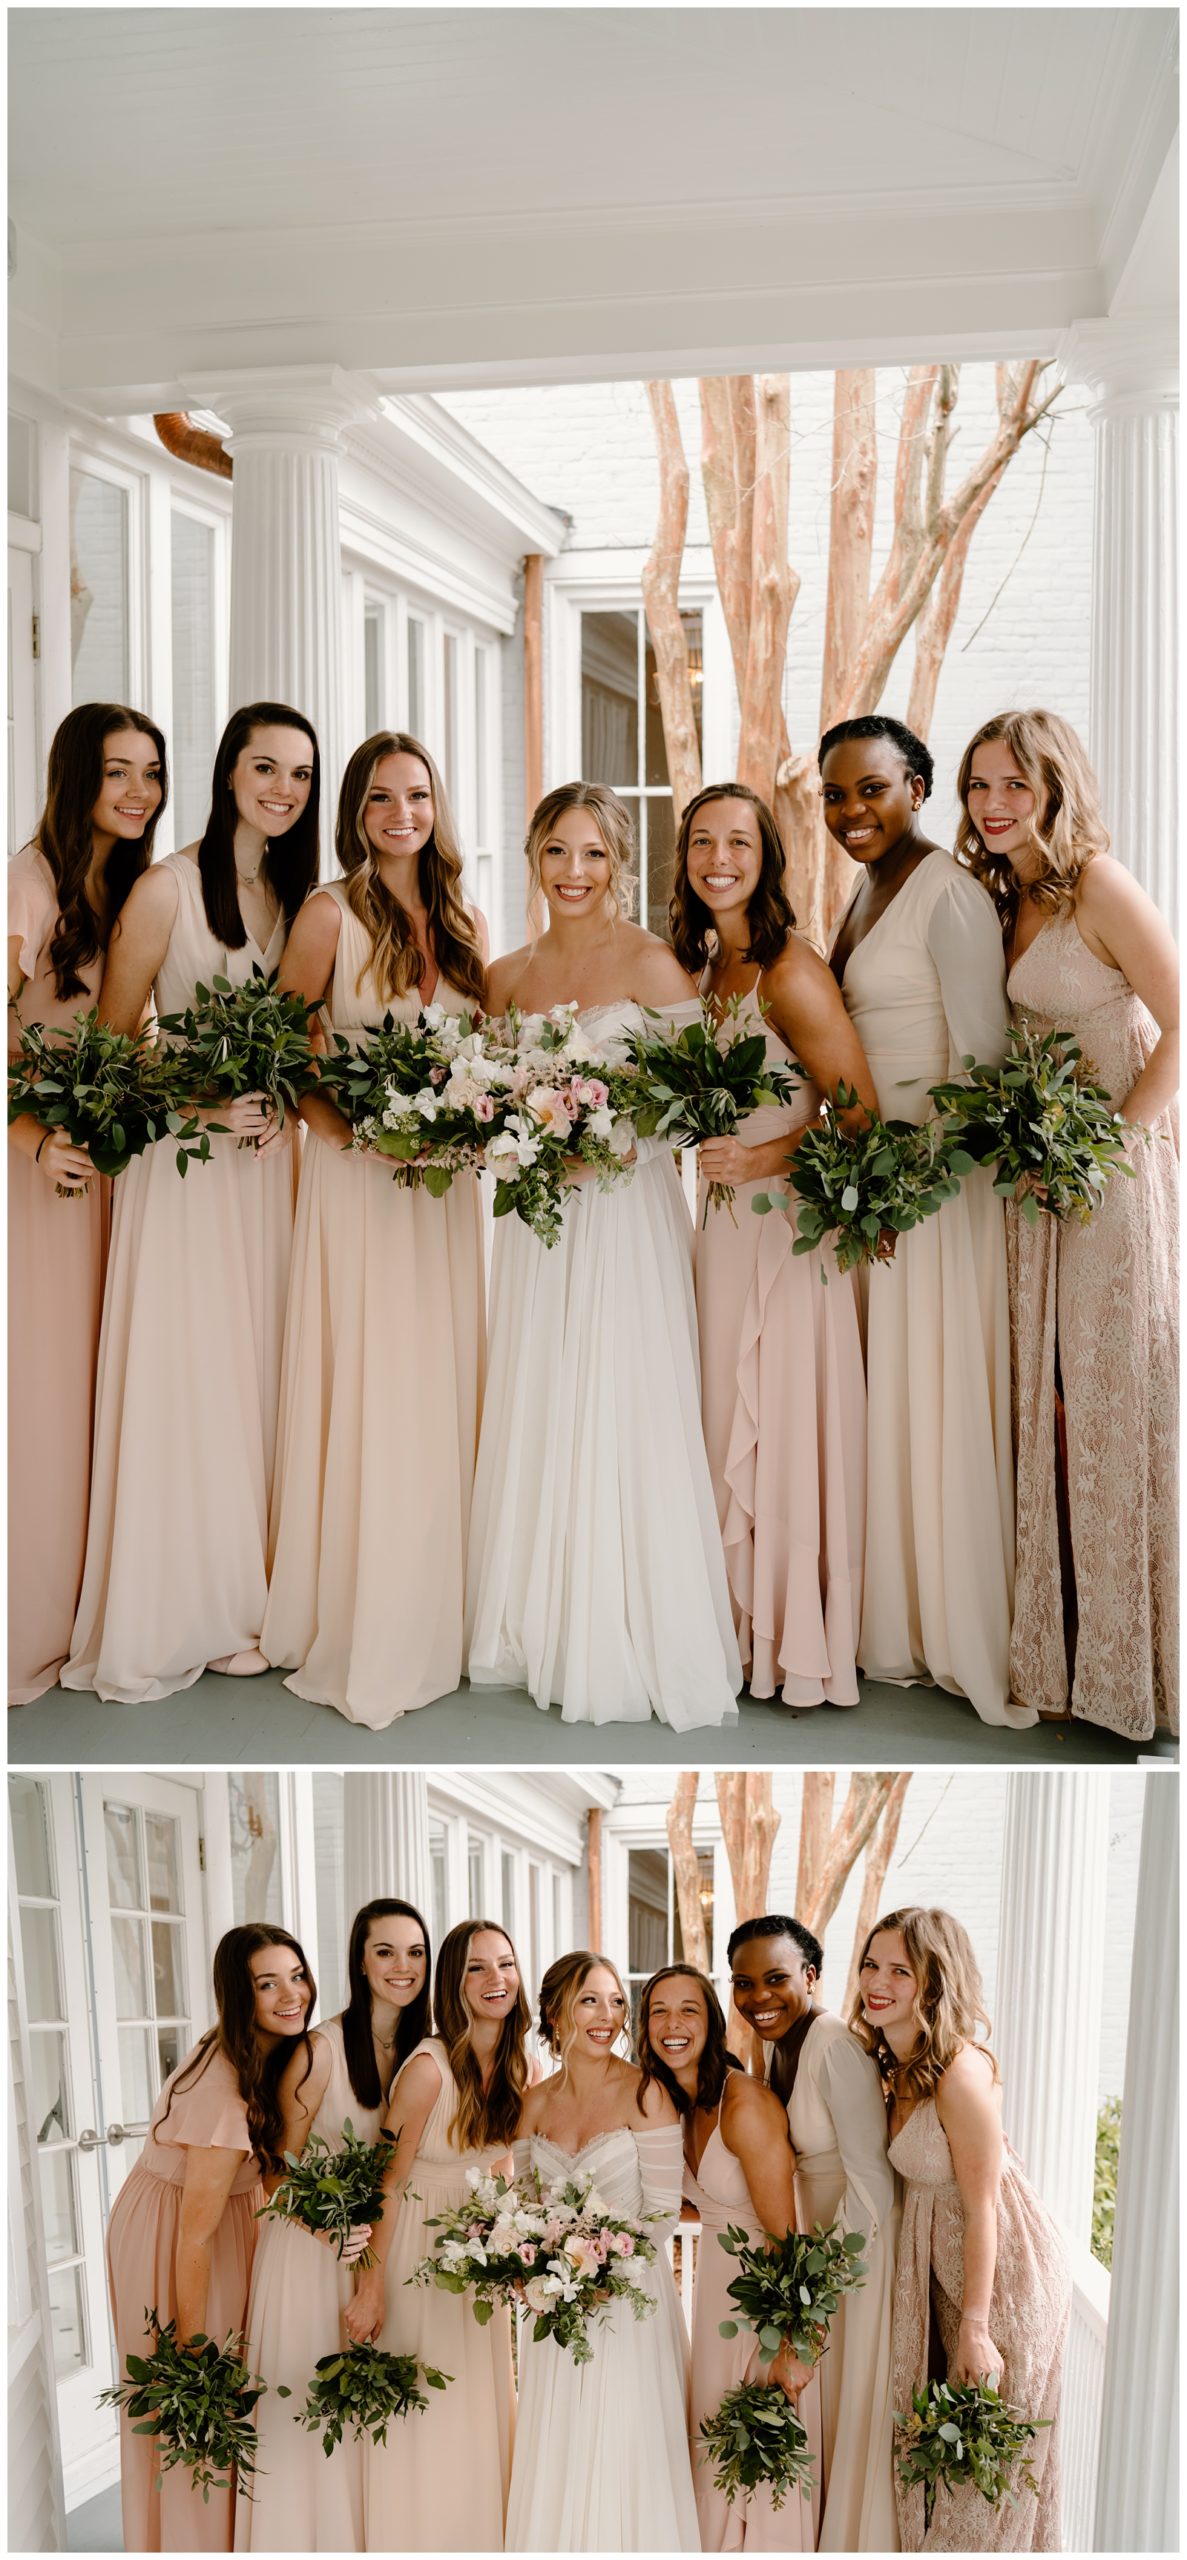 Bride and bridesmaids portraits with blush dresses in Greensboro, NC at the McAlister-Leftwich House by North Carolina wedding photographer